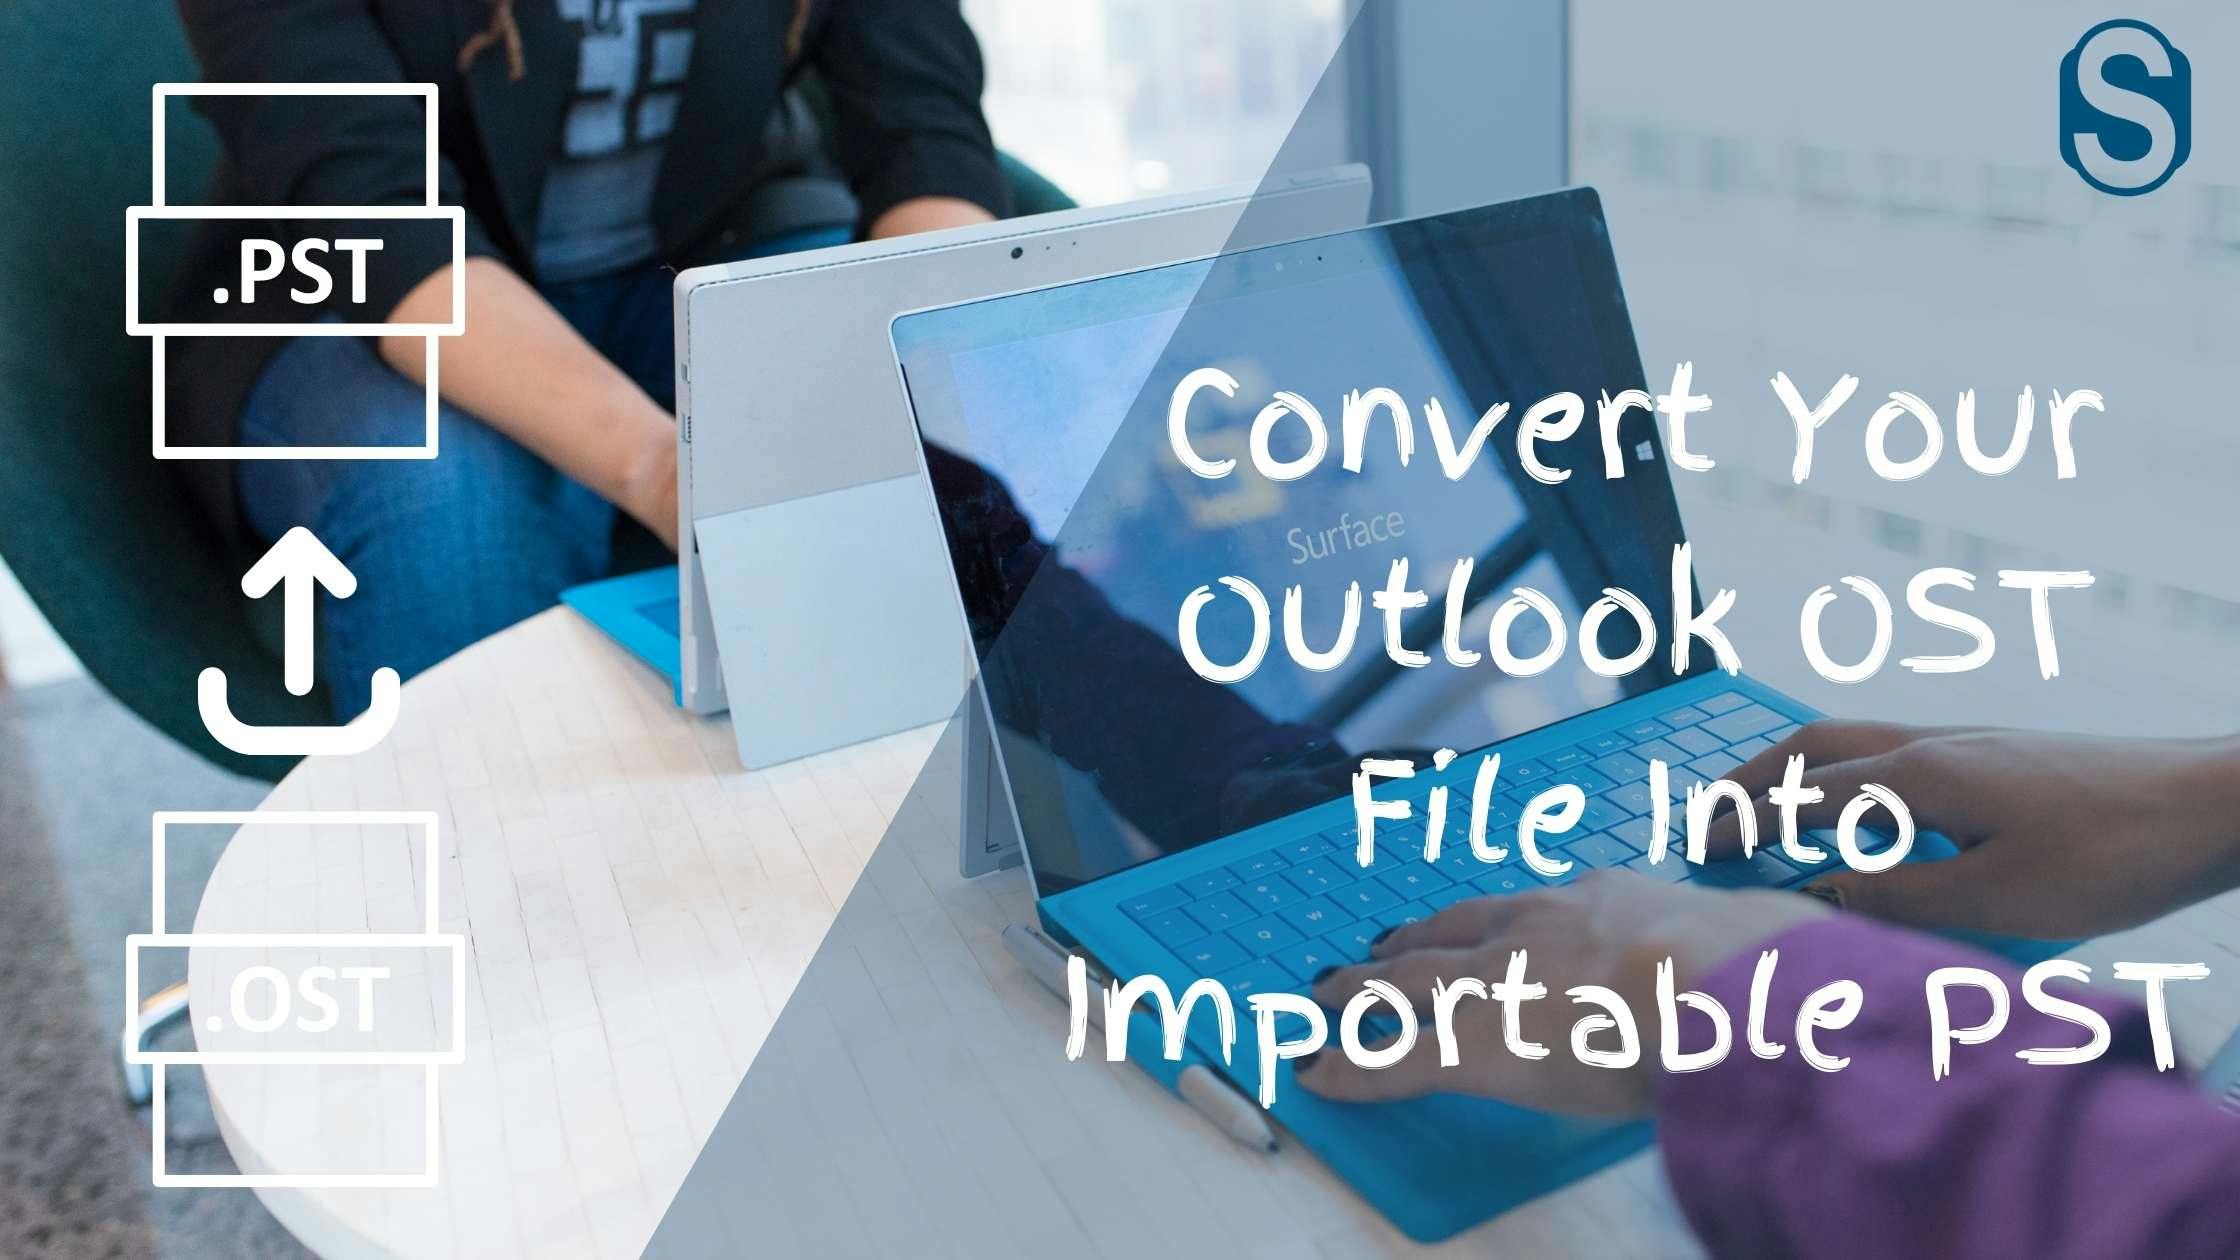 Convert Your Outlook OST File Into Importable PST.jpg